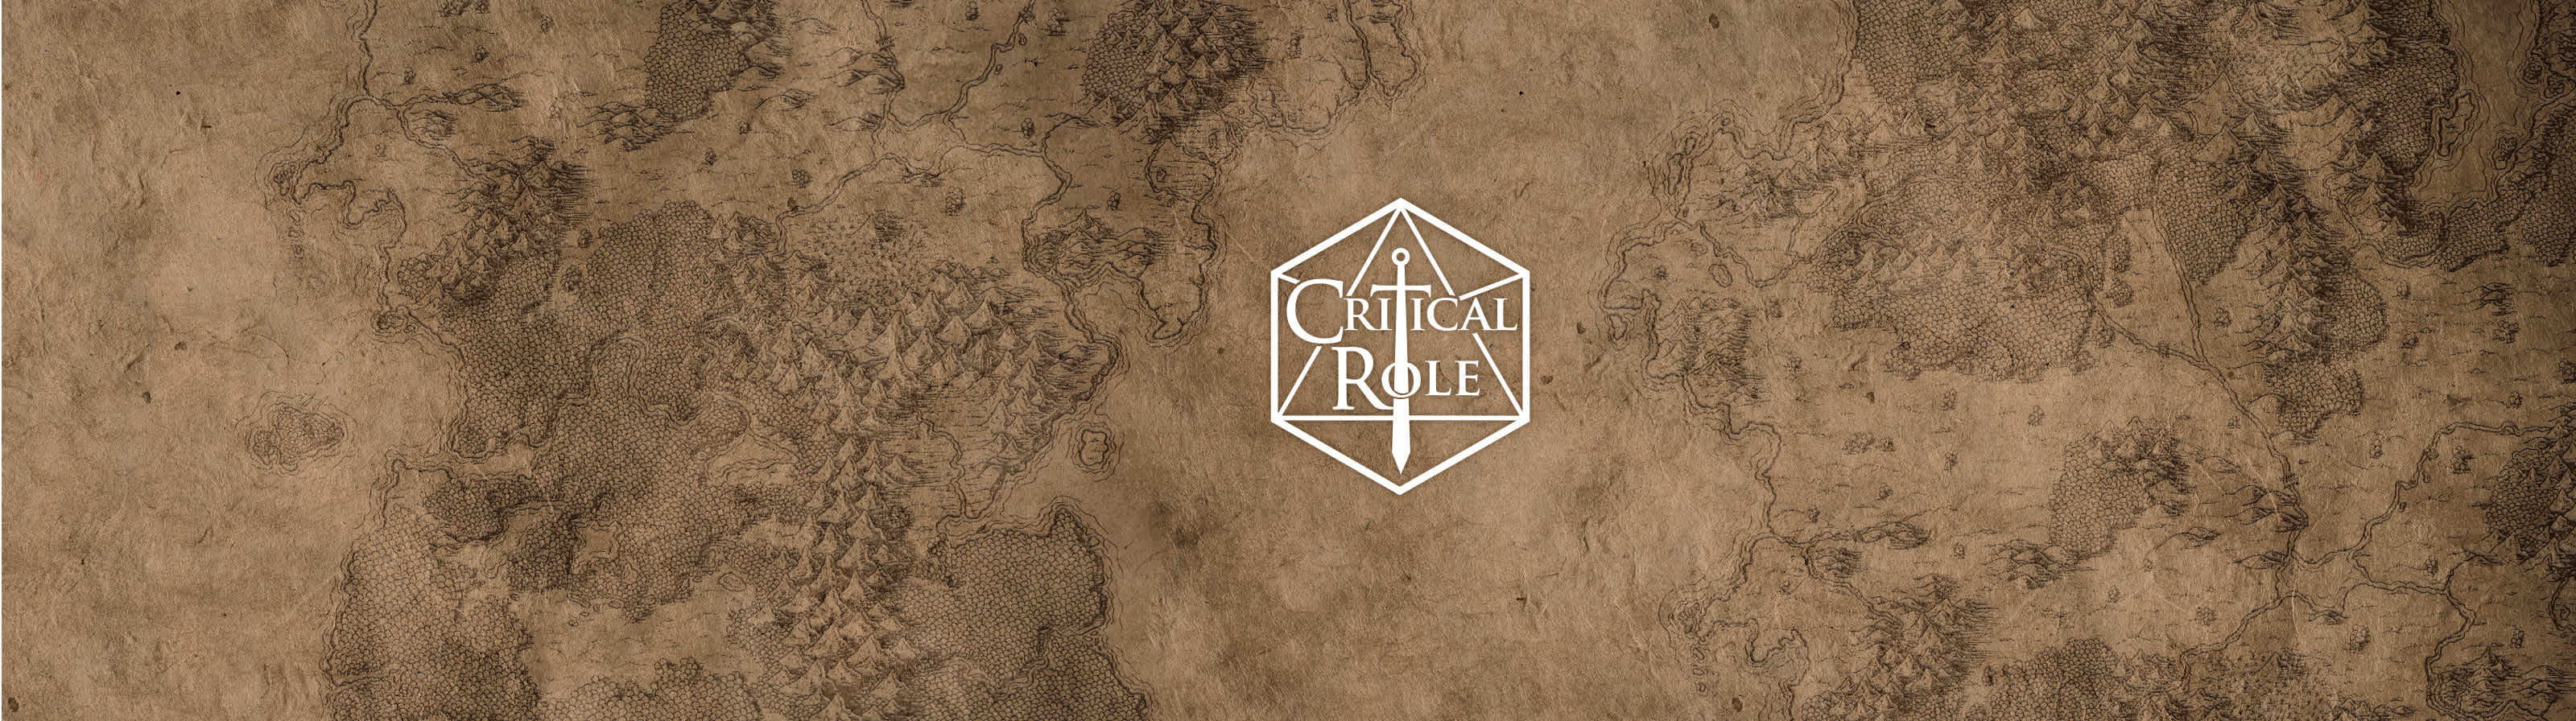 Critical Role banner